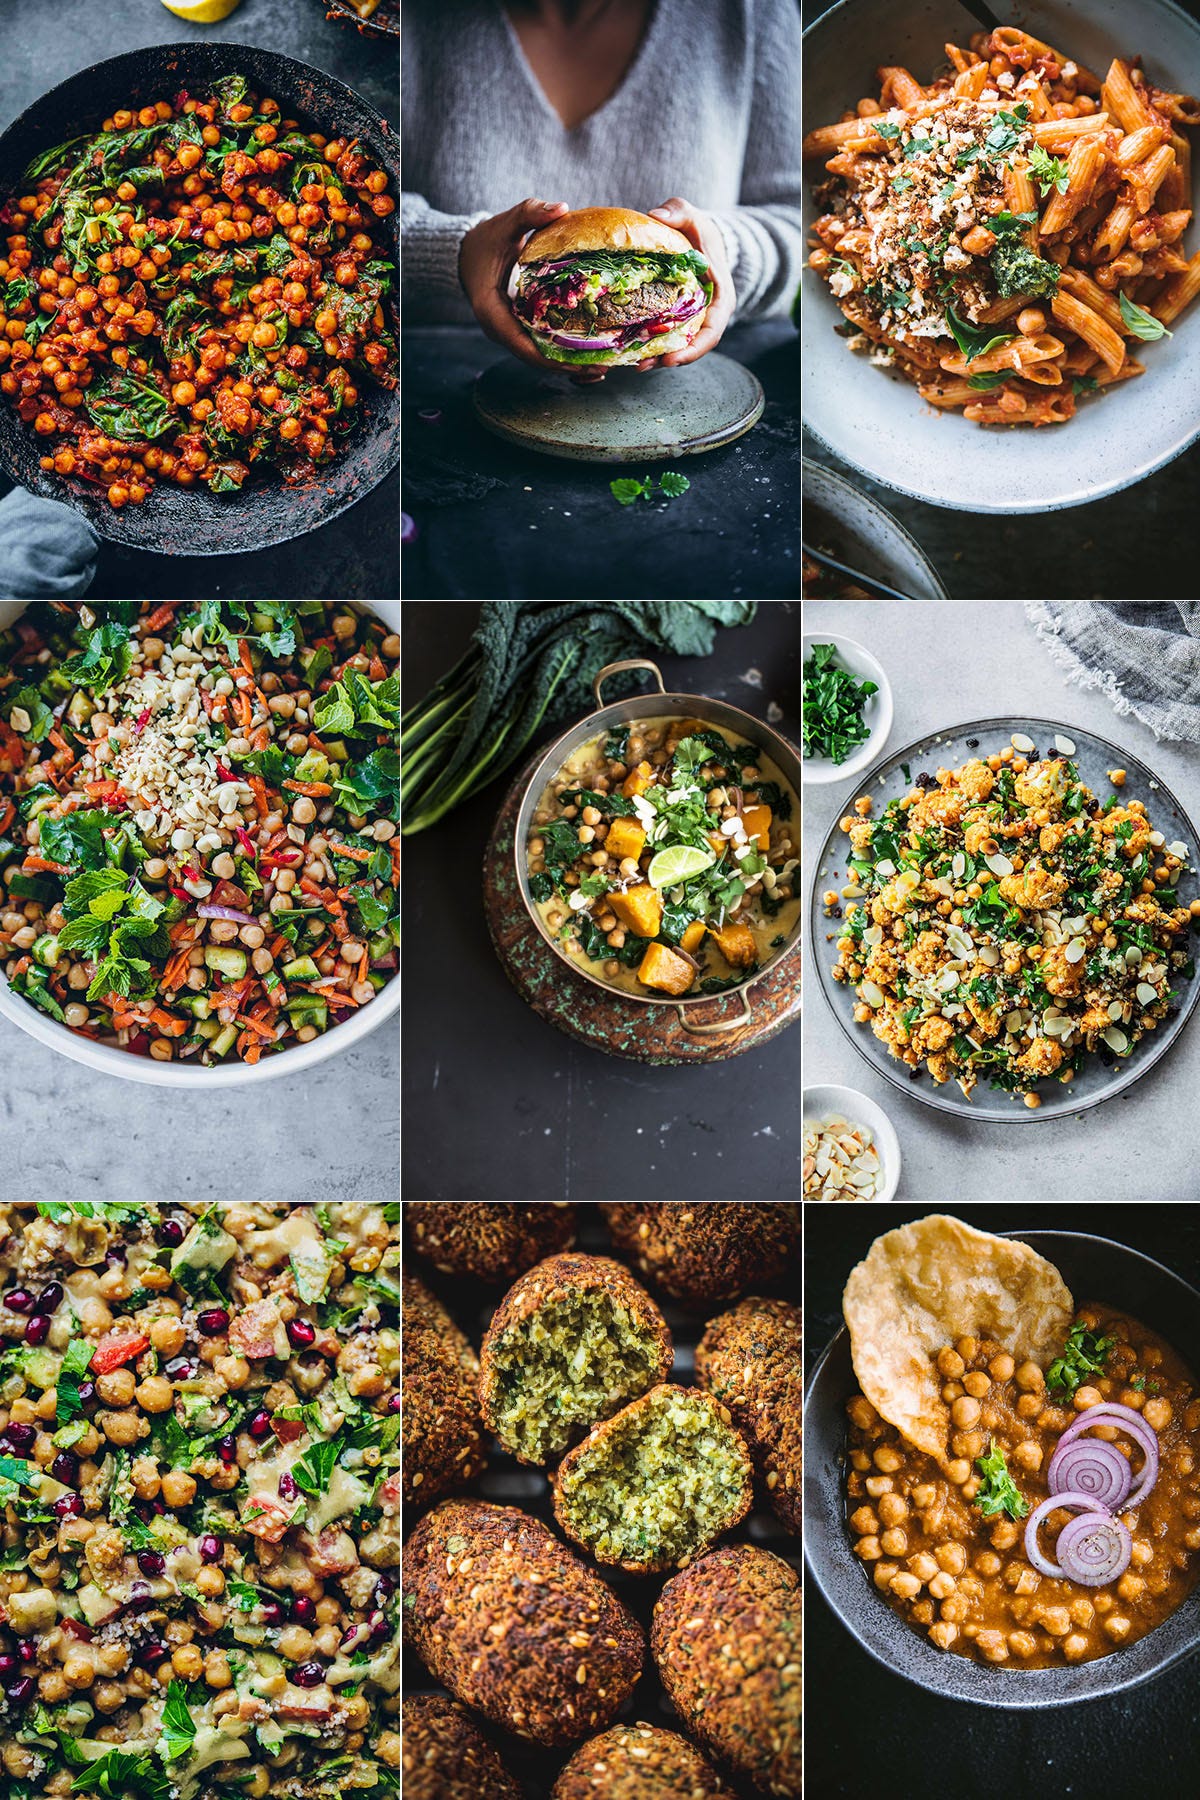 Basic Meal Prep For Daily Vegetarian Lunches + Recipes - Cook Republic